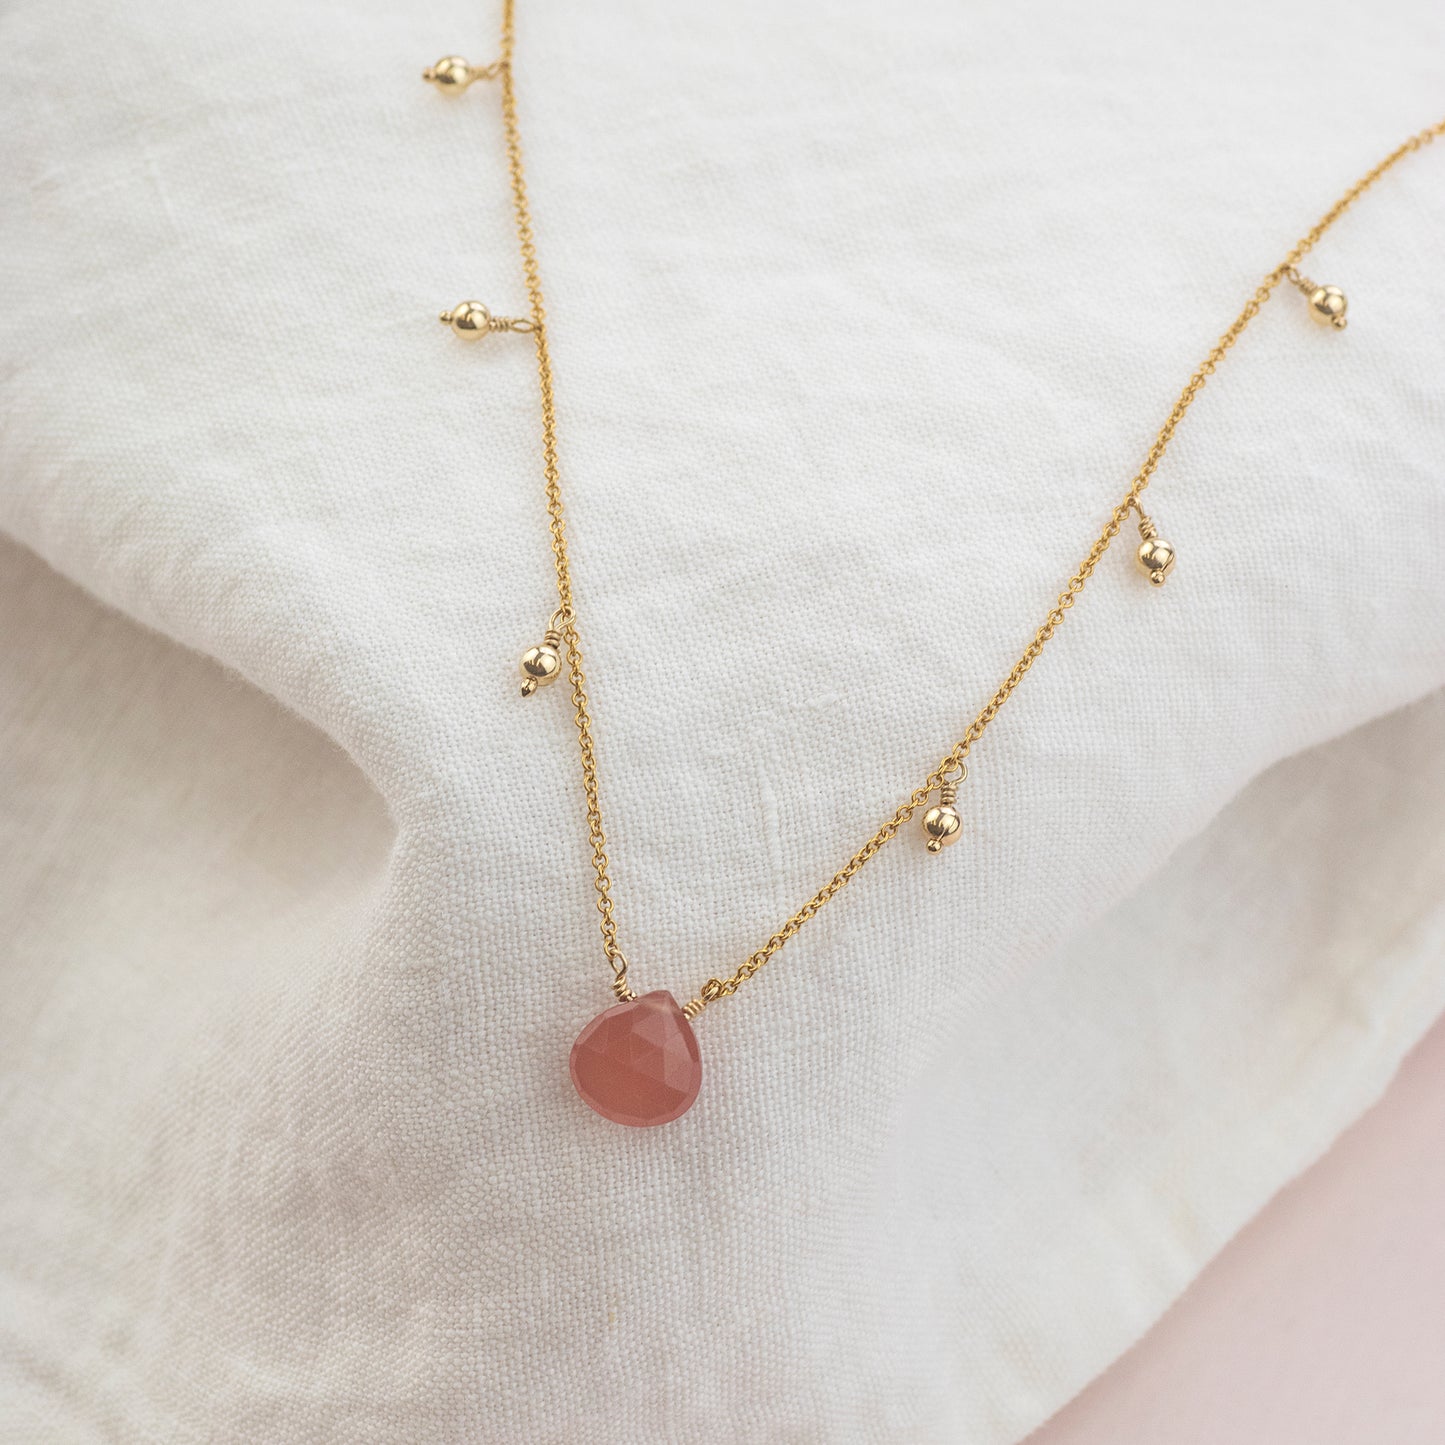 Good Luck Gift for Exams - Rhodochrosite Necklace - Energy, Positivity & Courage